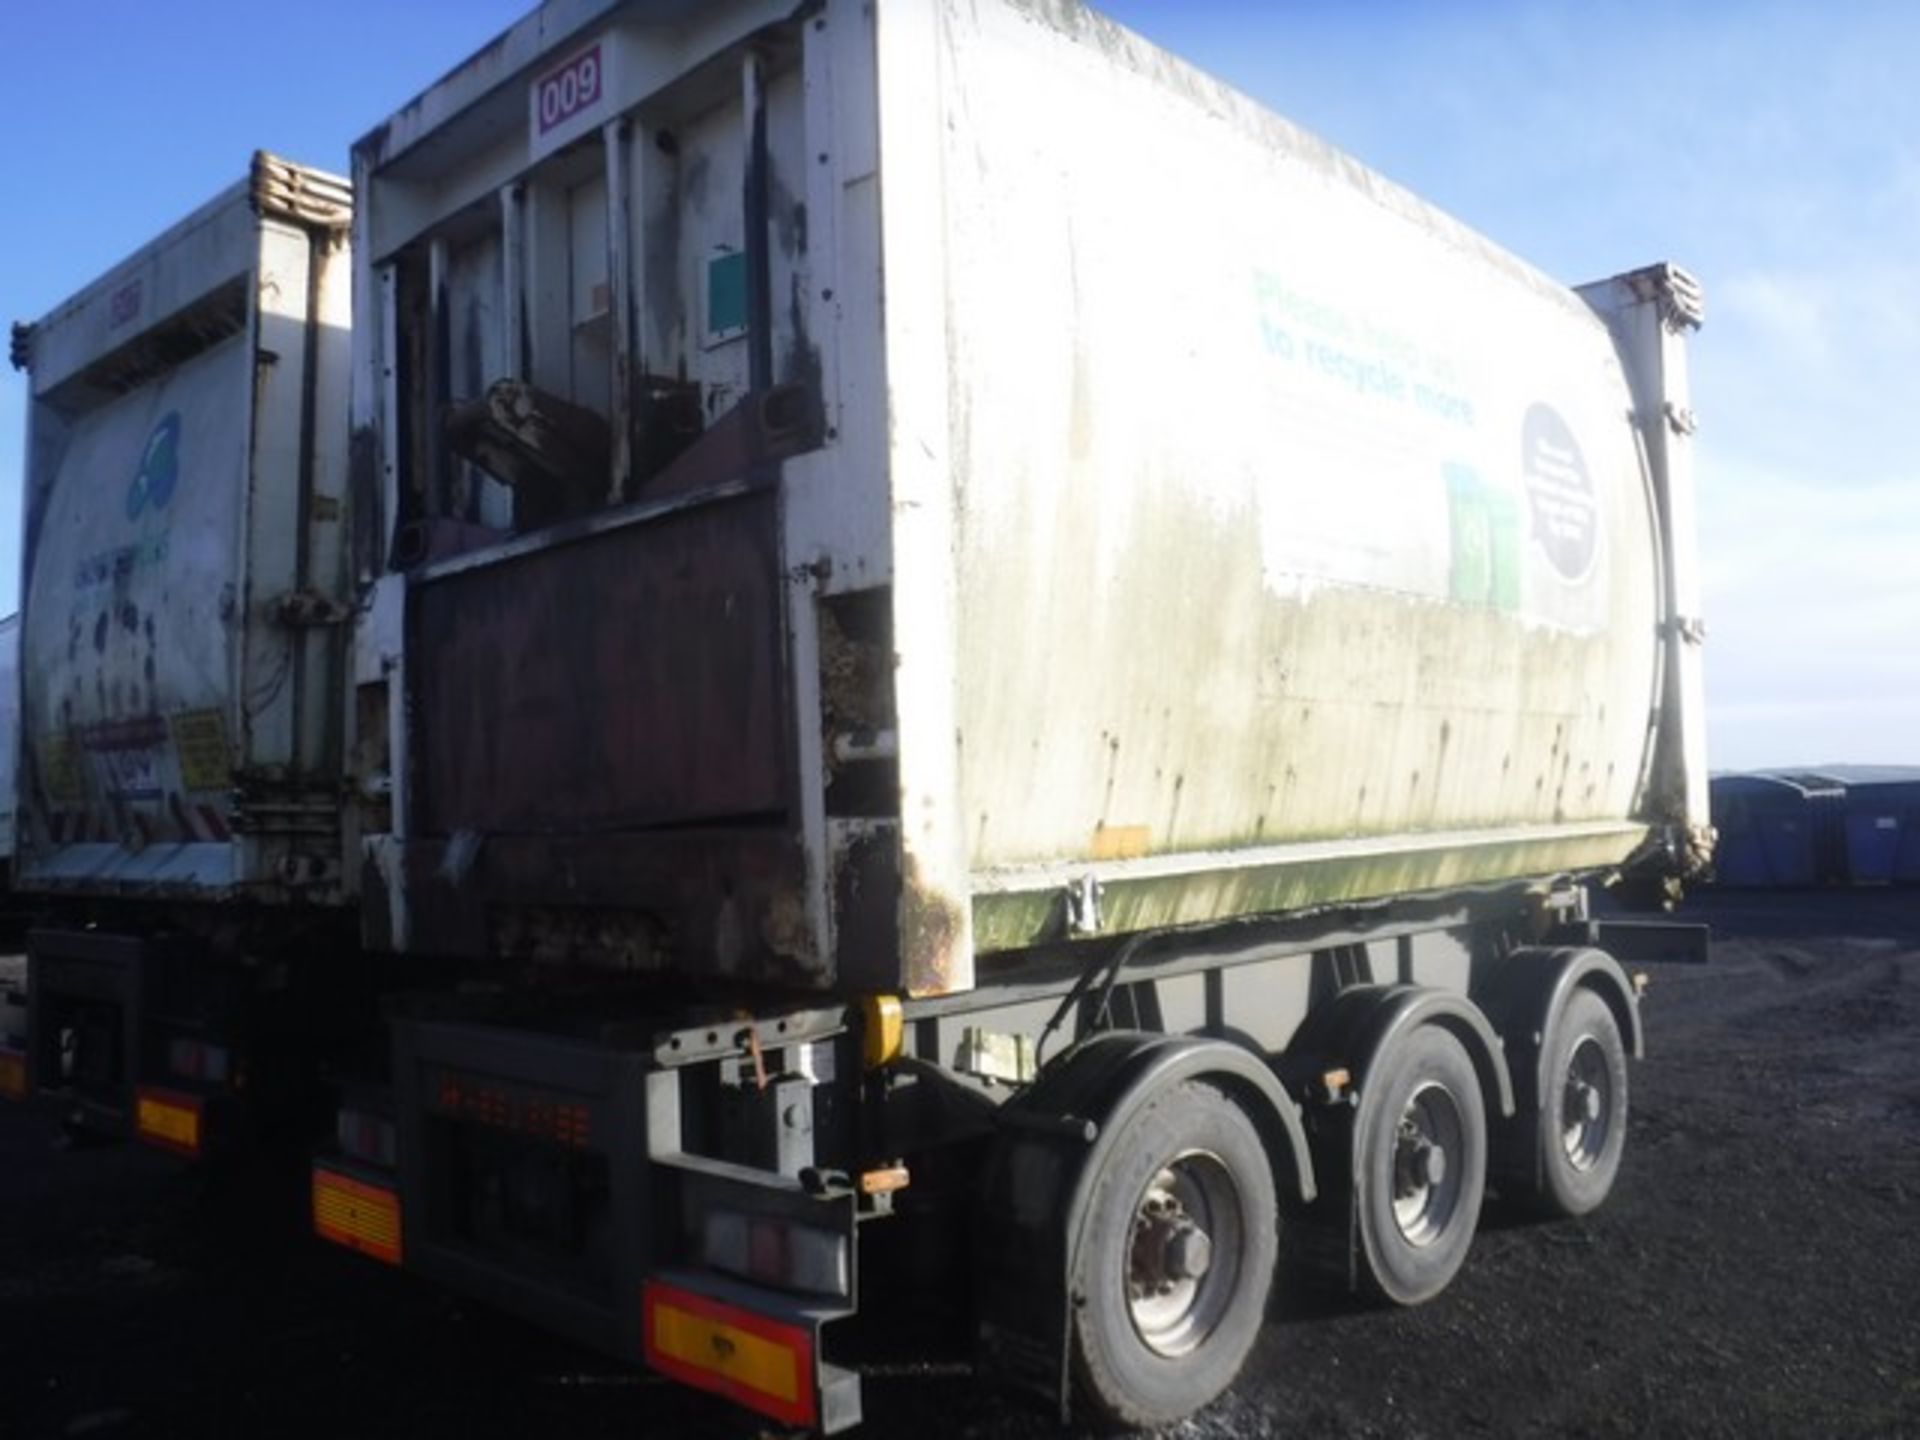 TRI-AXLE ARTICULATED TRAILER WITH WASTE COMPACTOR SKIP - 2009 SN - SW32111568D006810 - Image 17 of 17